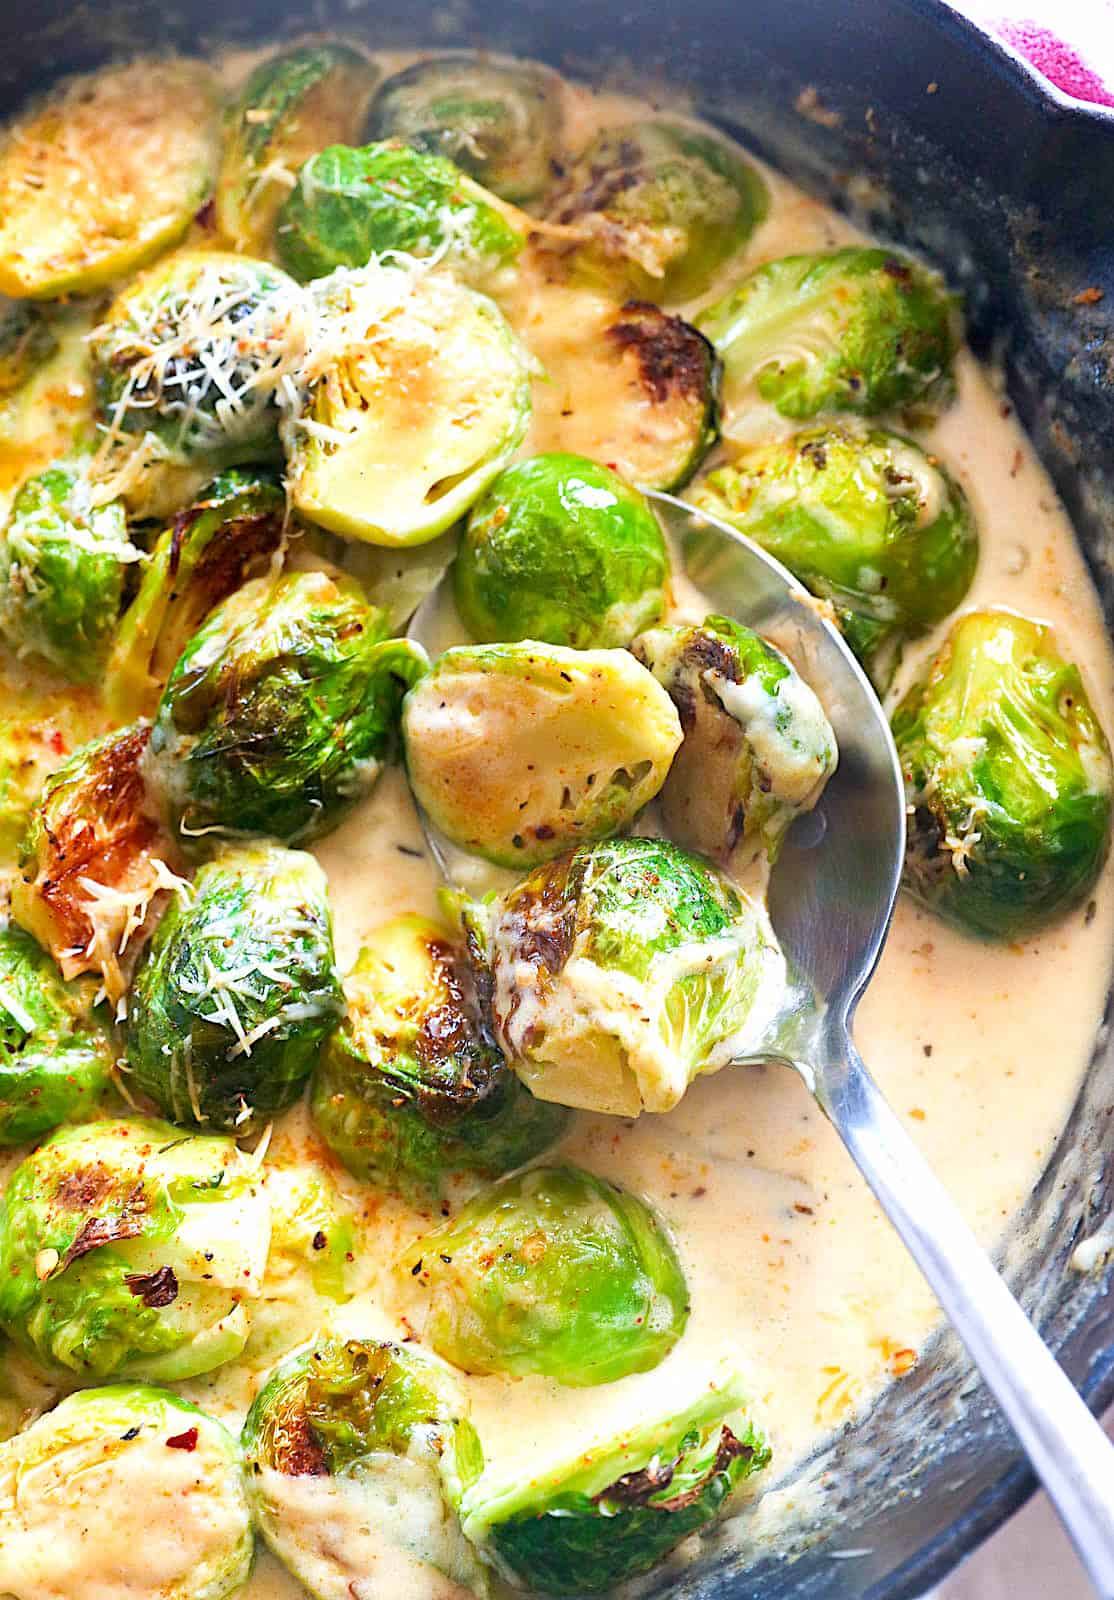 Enjoy creamy Brussels sprouts as a healthy comfort food